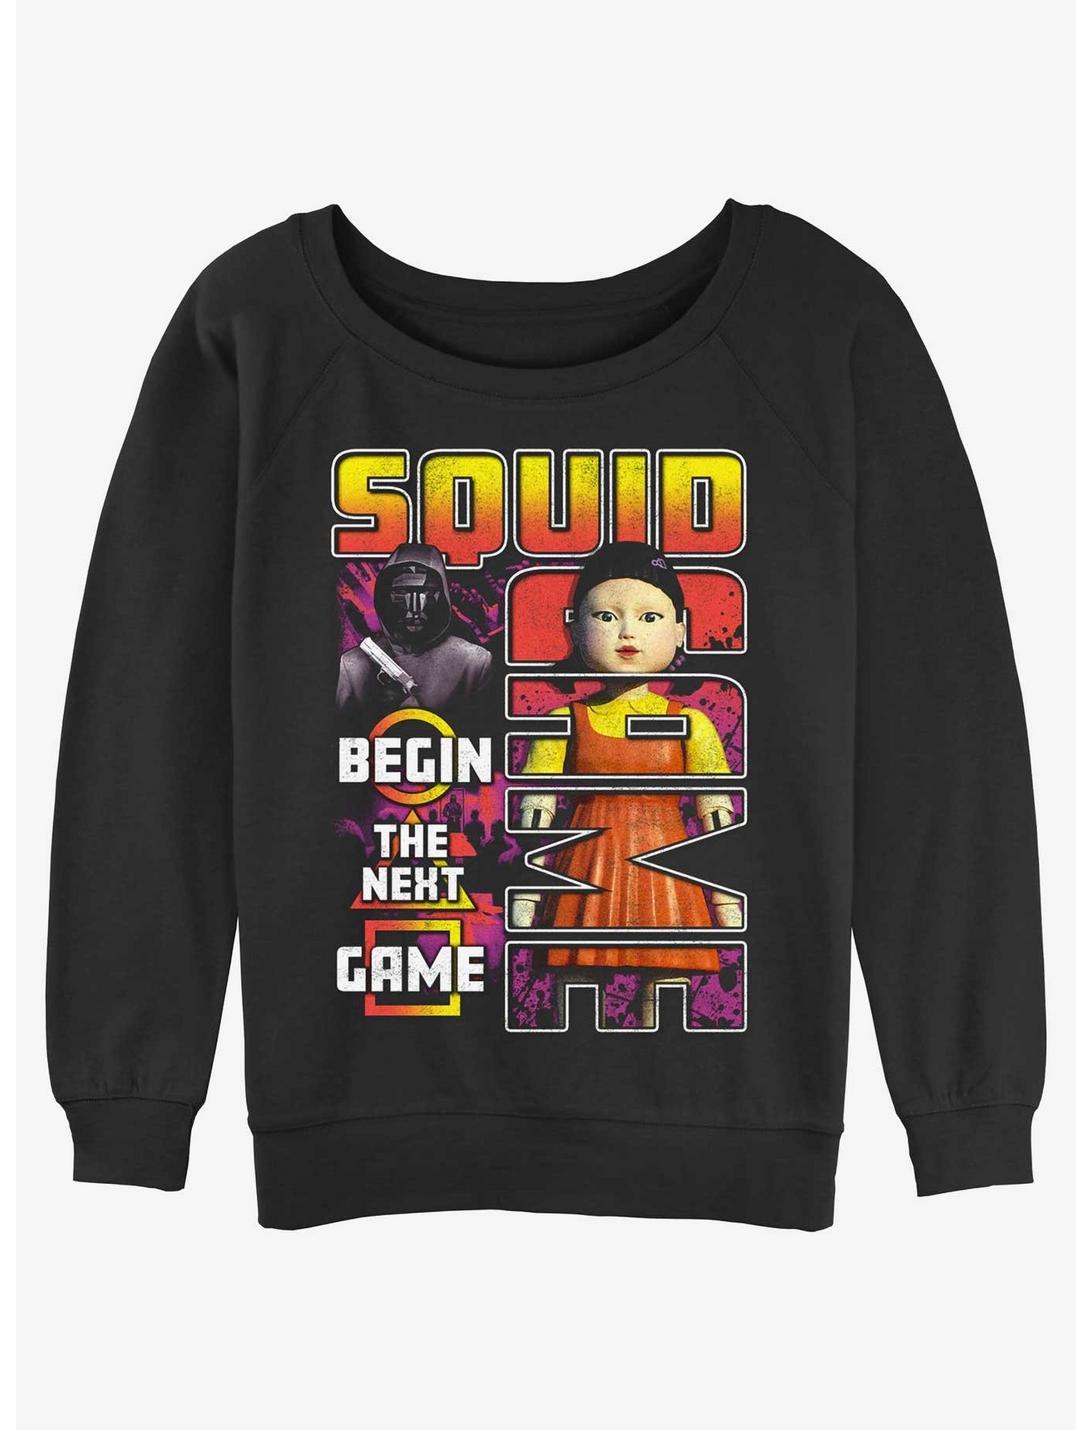 Squid Game Masked Man and Young-Hee Doll Star The Next Game Girls Slouchy Sweatshirt, BLACK, hi-res